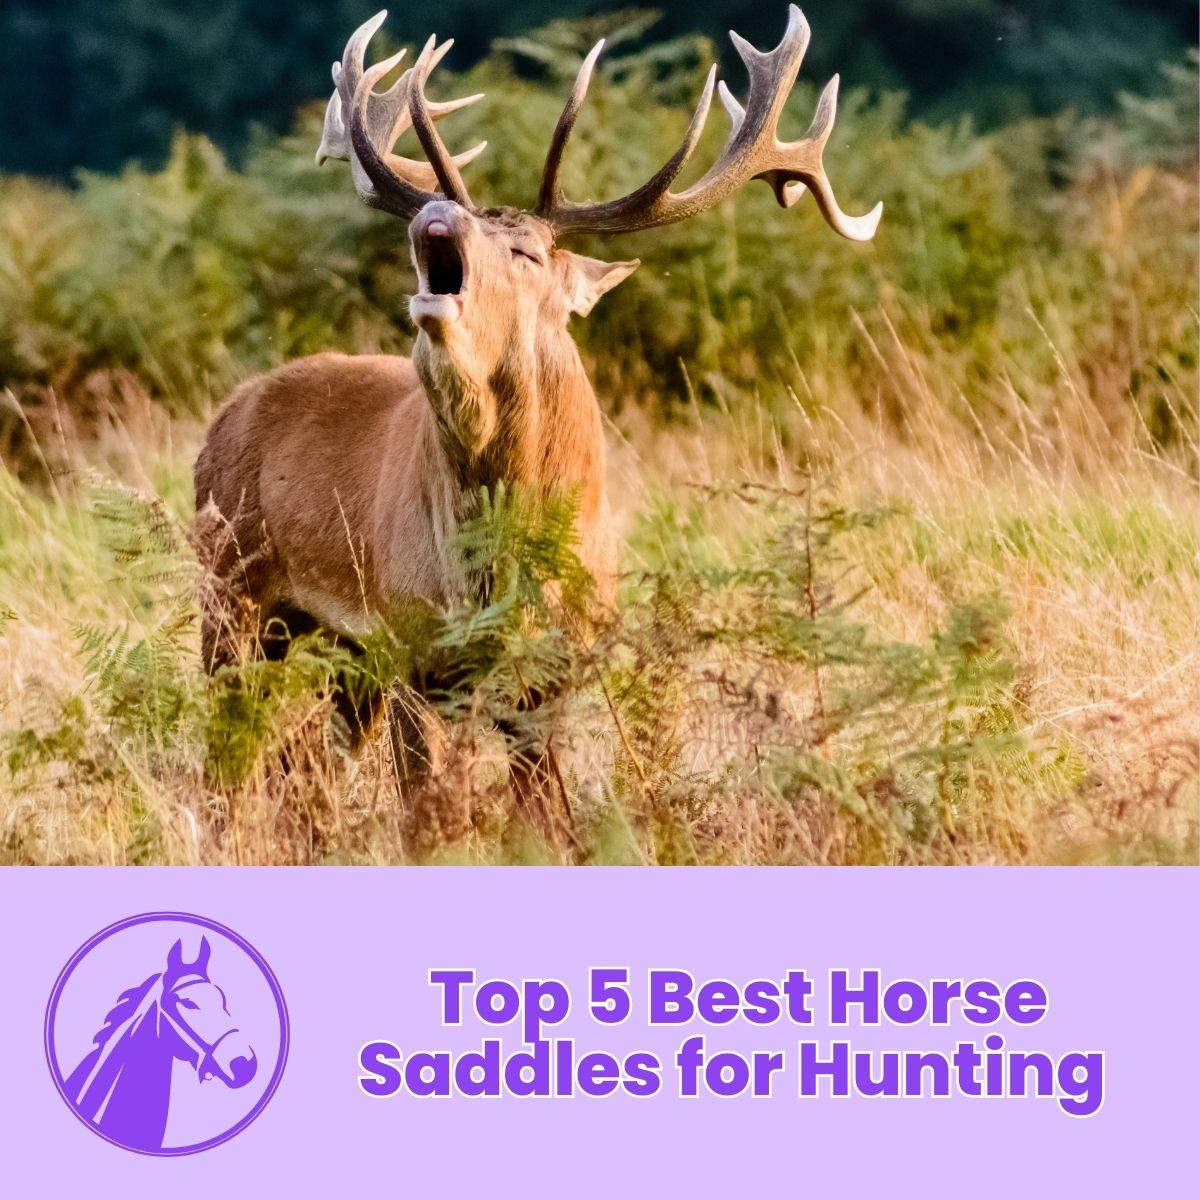 You are currently viewing Top 5 Best Horse Saddles for Hunting